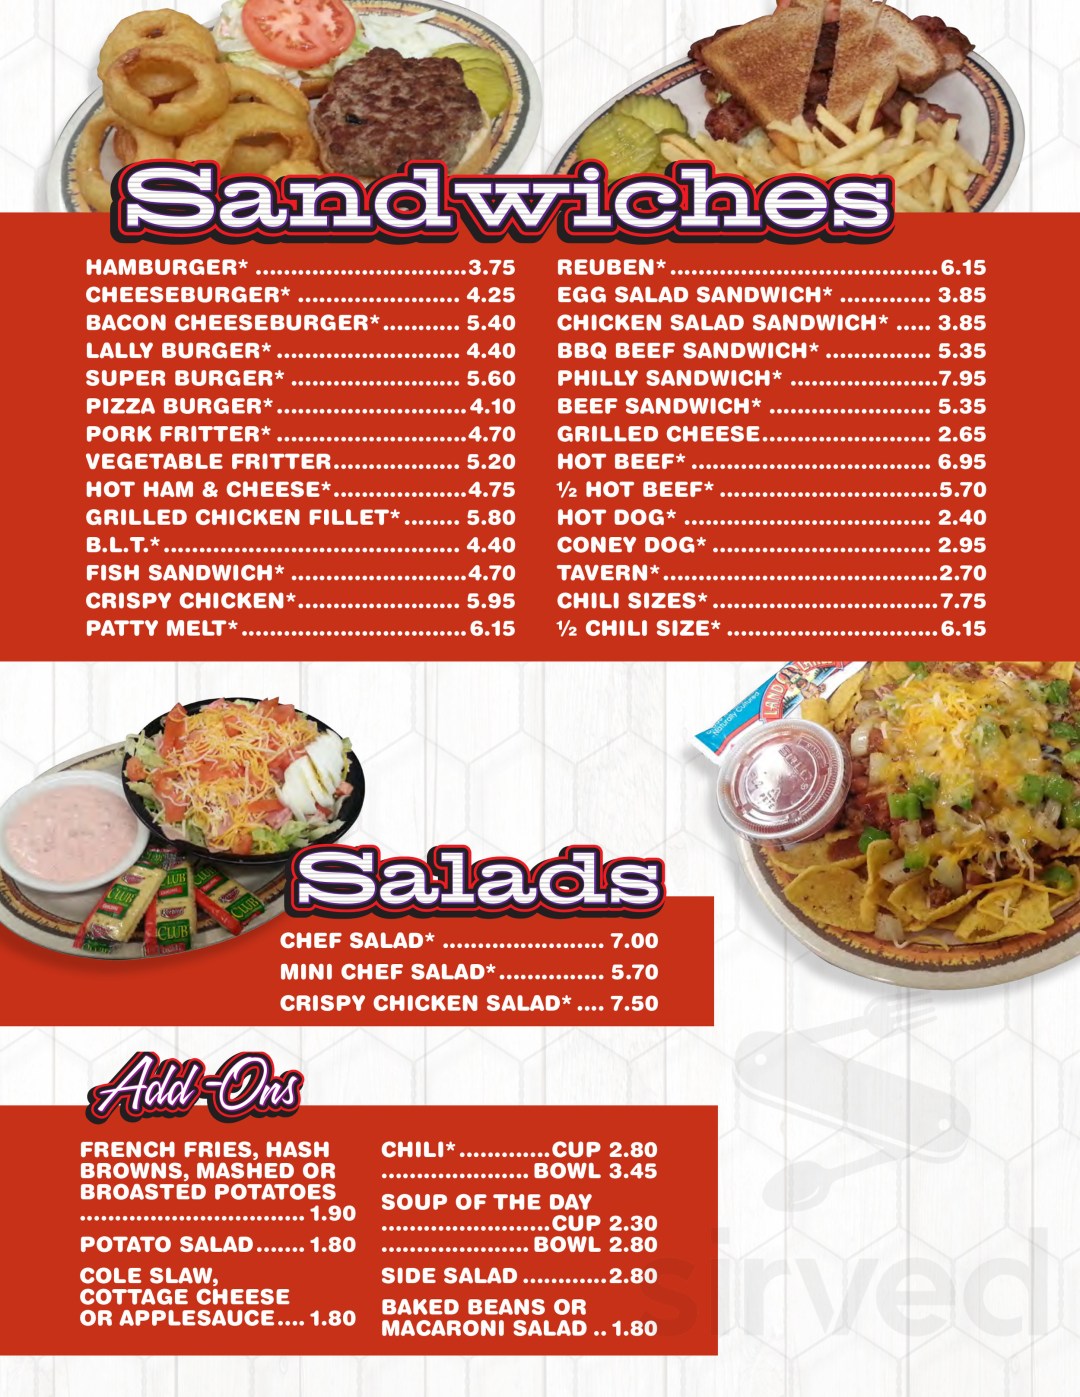 Picture of: Lally’s Eastside Restaurant menu in Le Mars, Iowa, USA